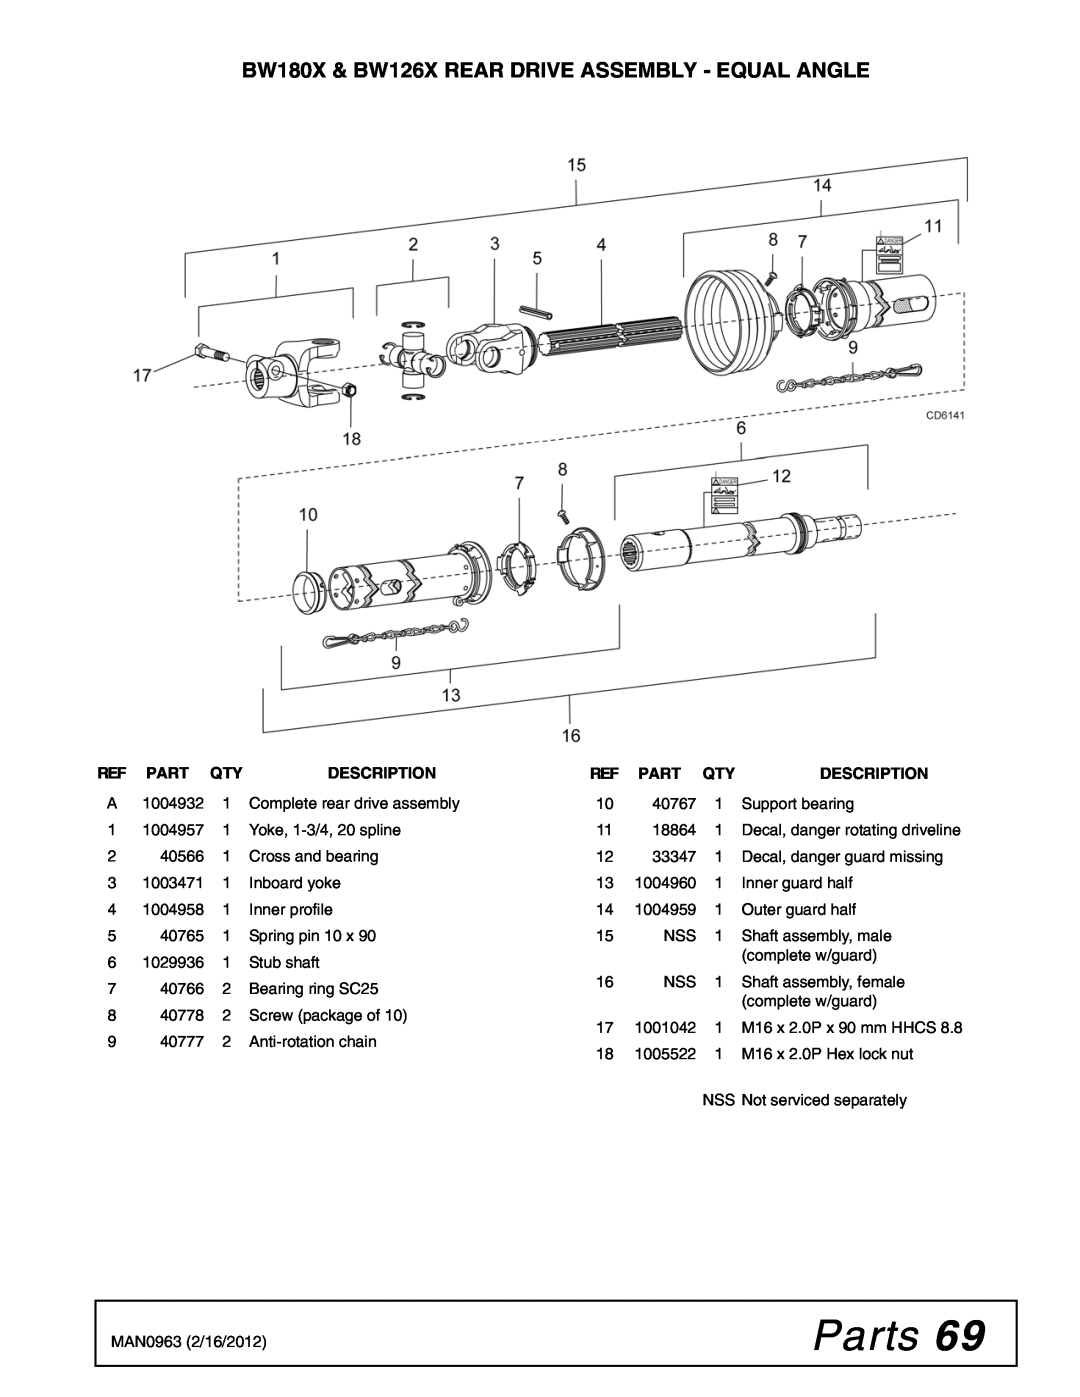 Woods Equipment BW180XHDQ, BW126XHDQ manual Parts, BW180X & BW126X REAR DRIVE ASSEMBLY - EQUAL ANGLE, Description 